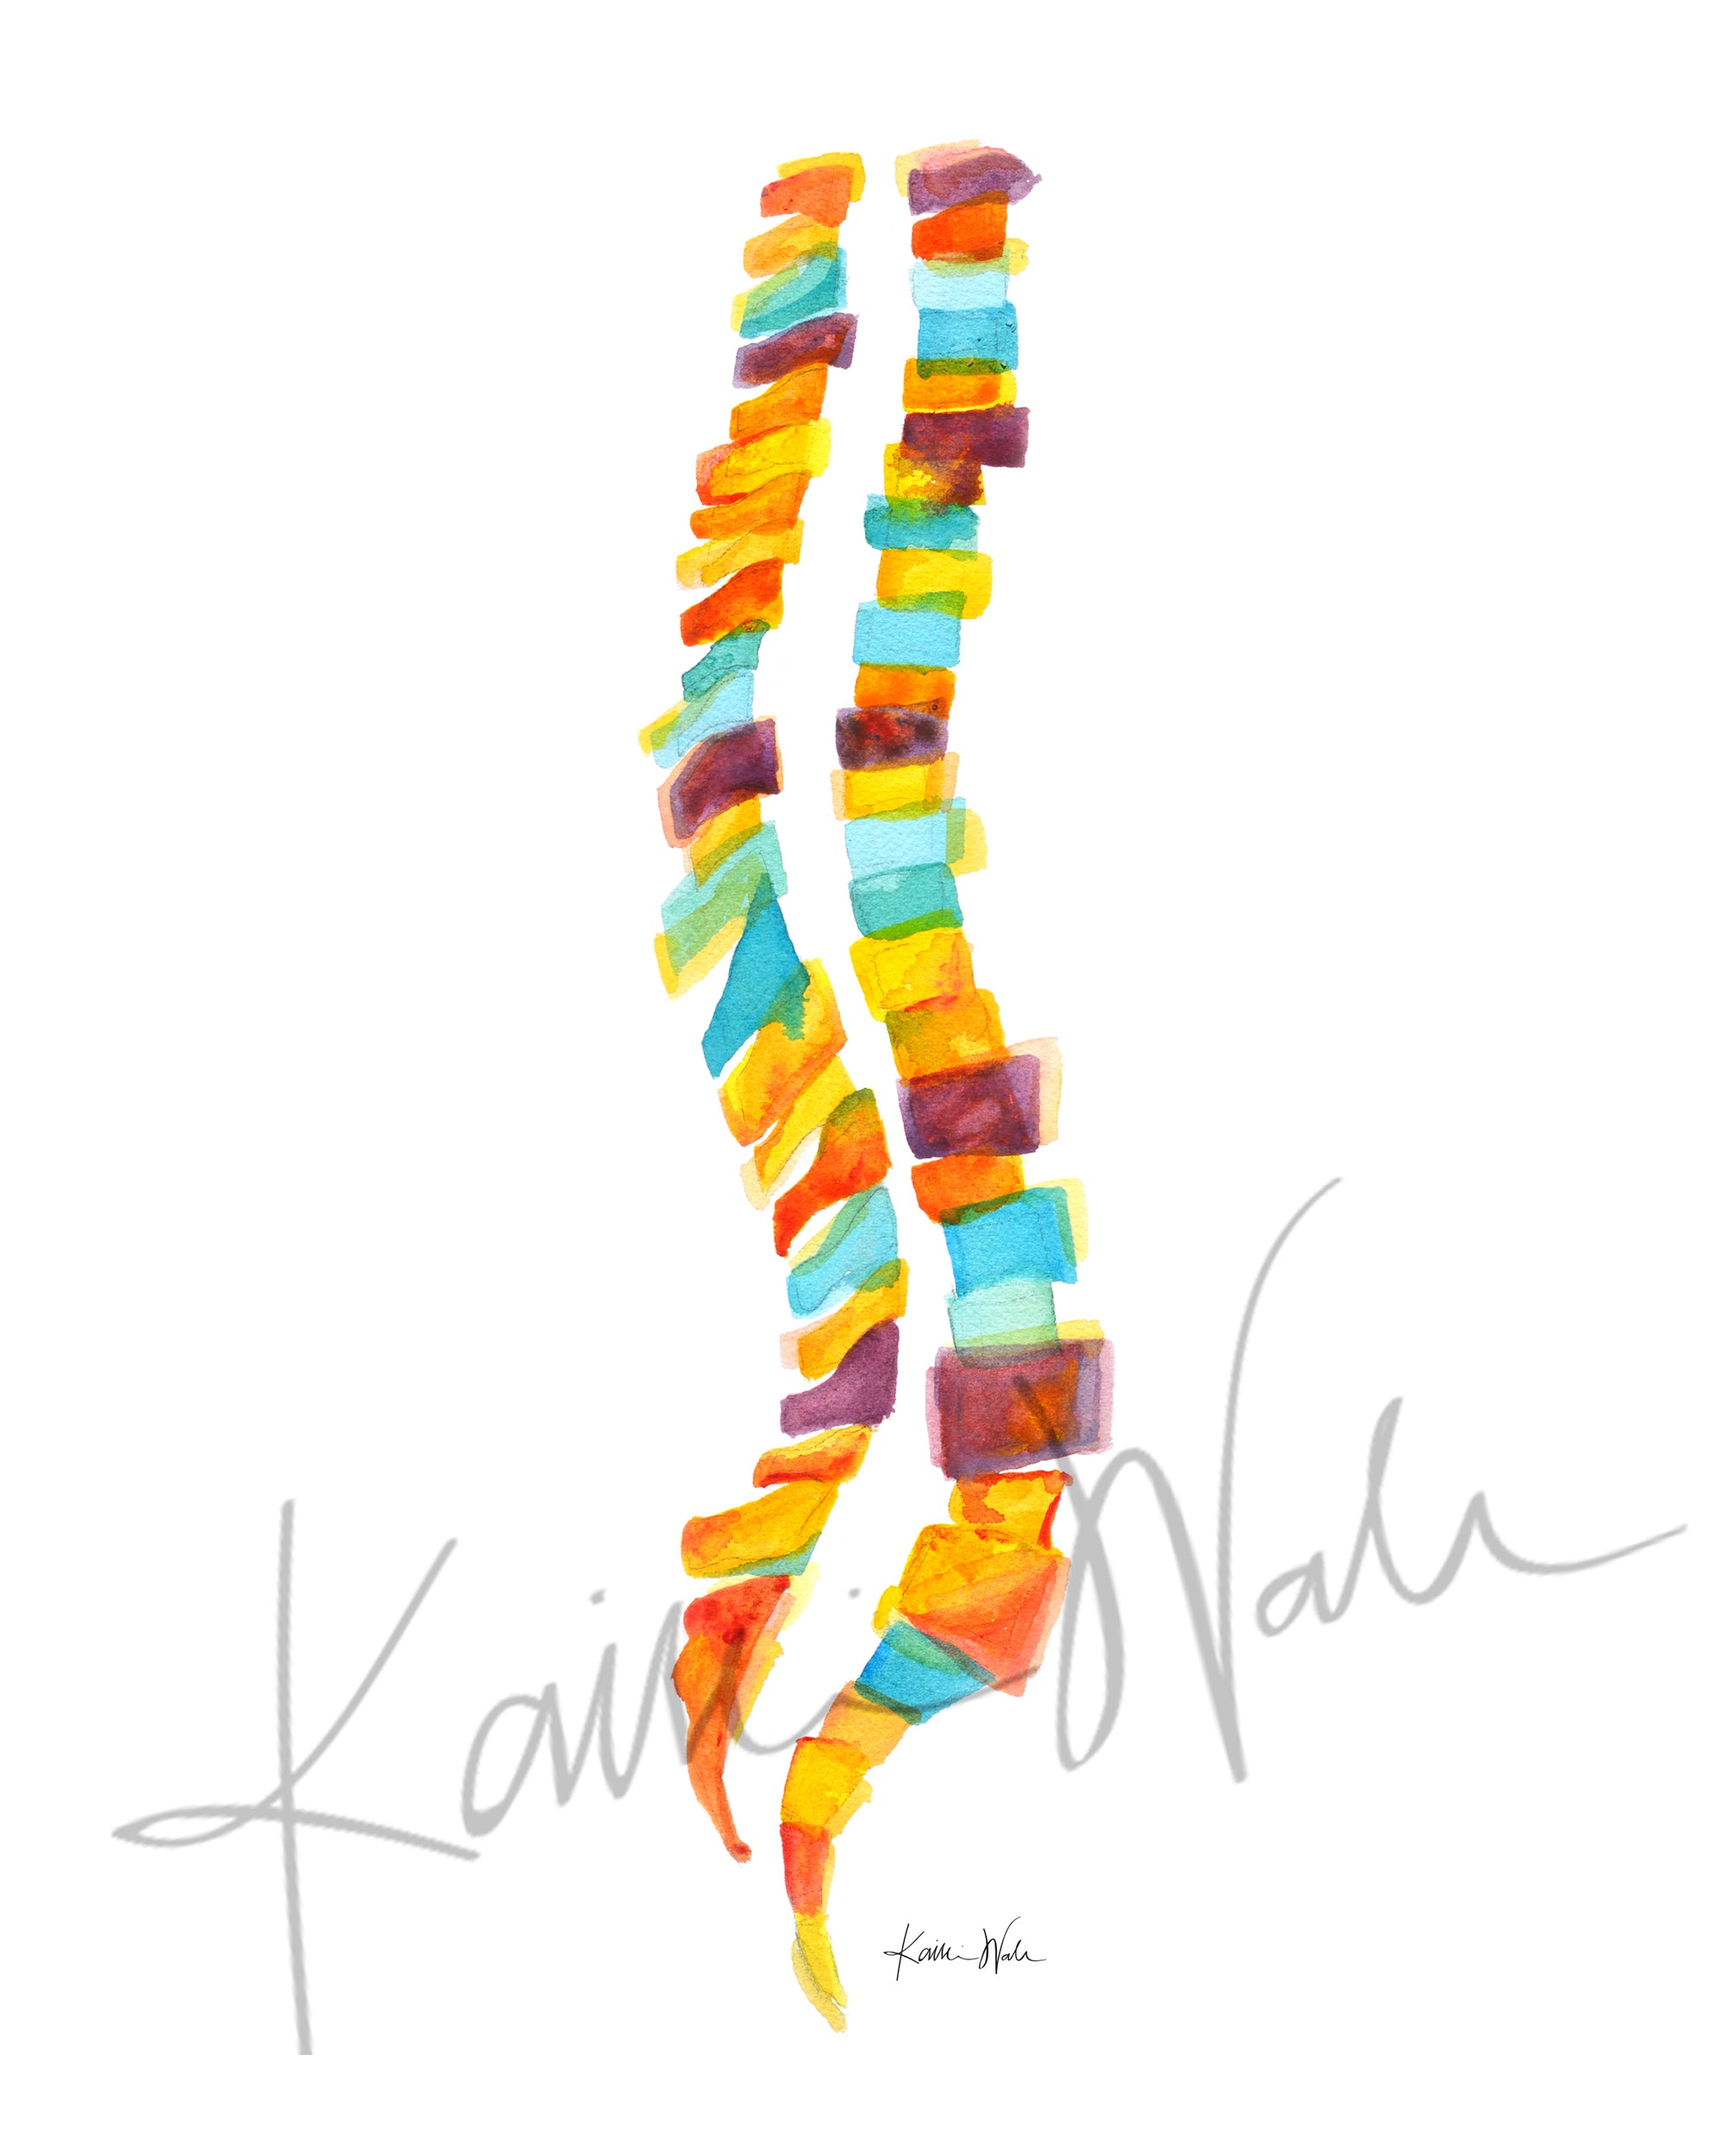 Unframed watercolor painting of a spinal columns in yellow, orange, burgundy and teal.